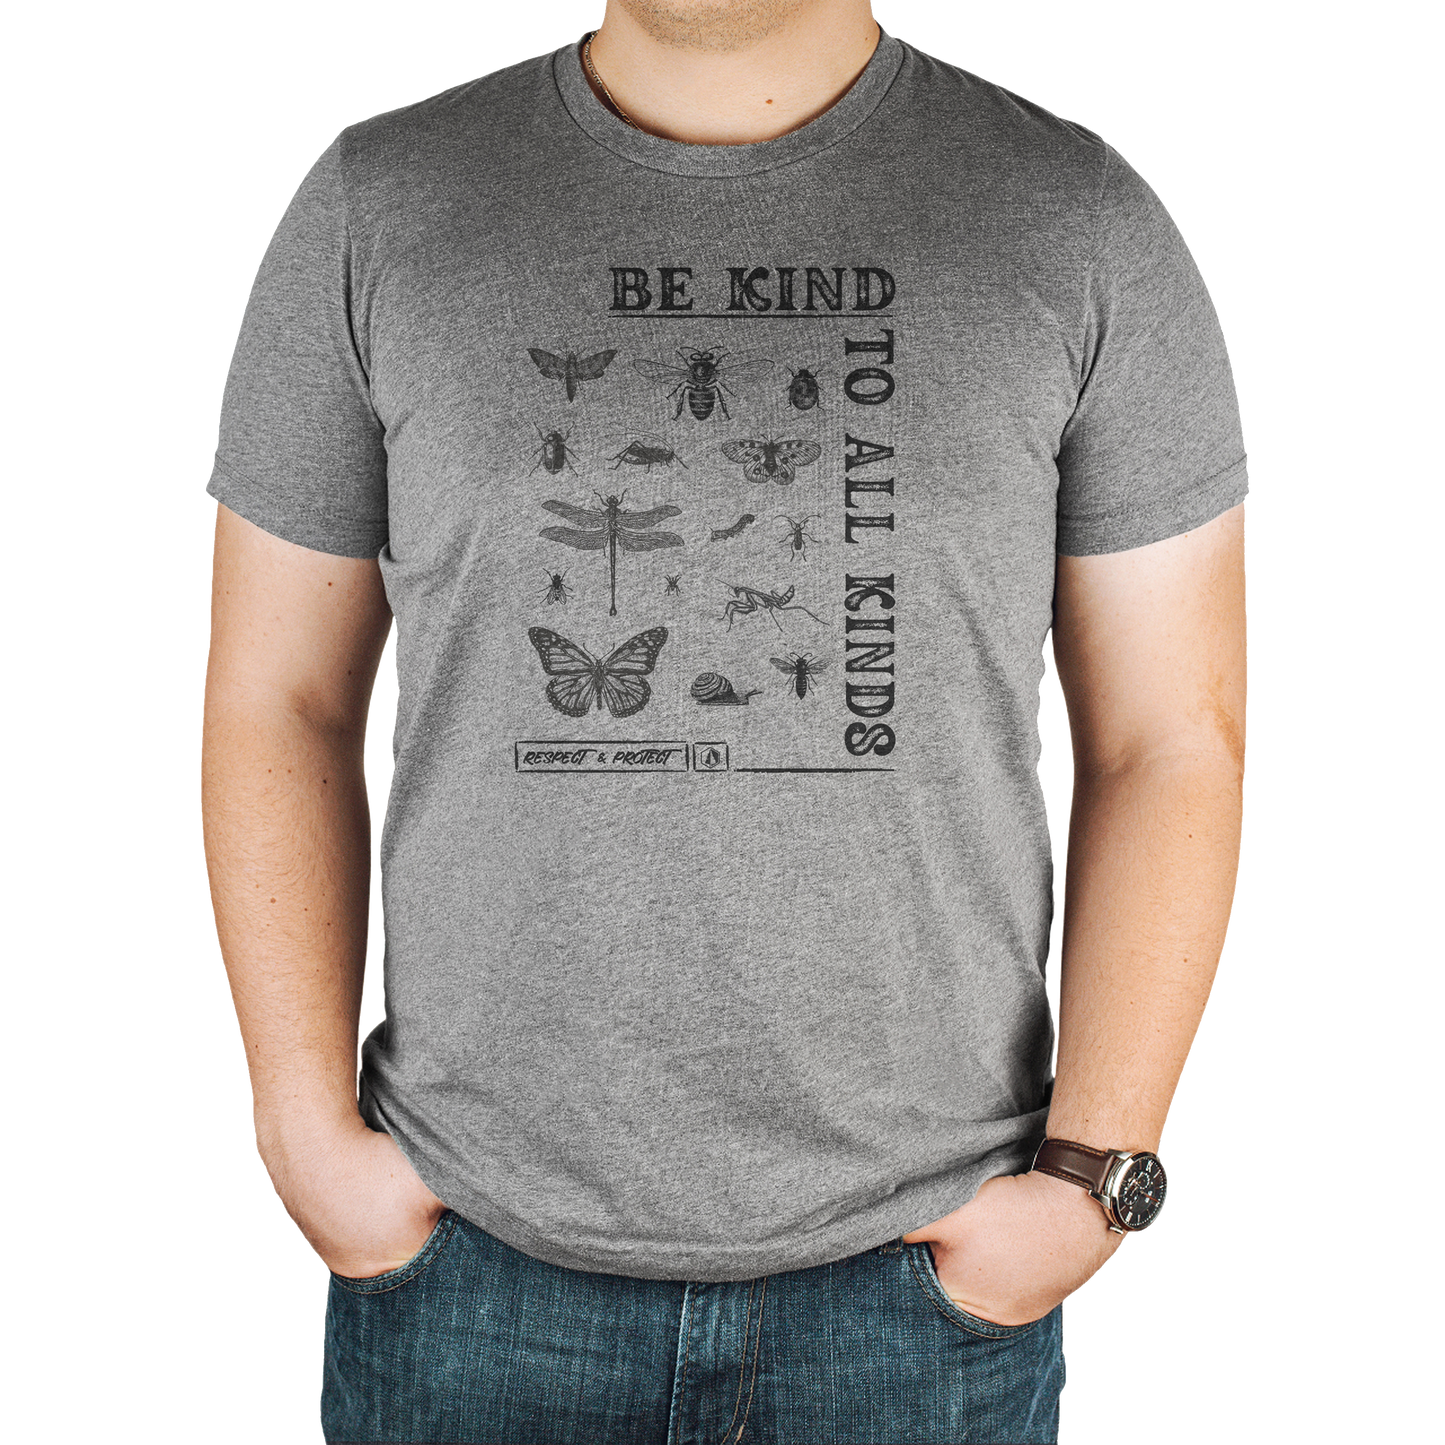 Be Kind to Critters Tee